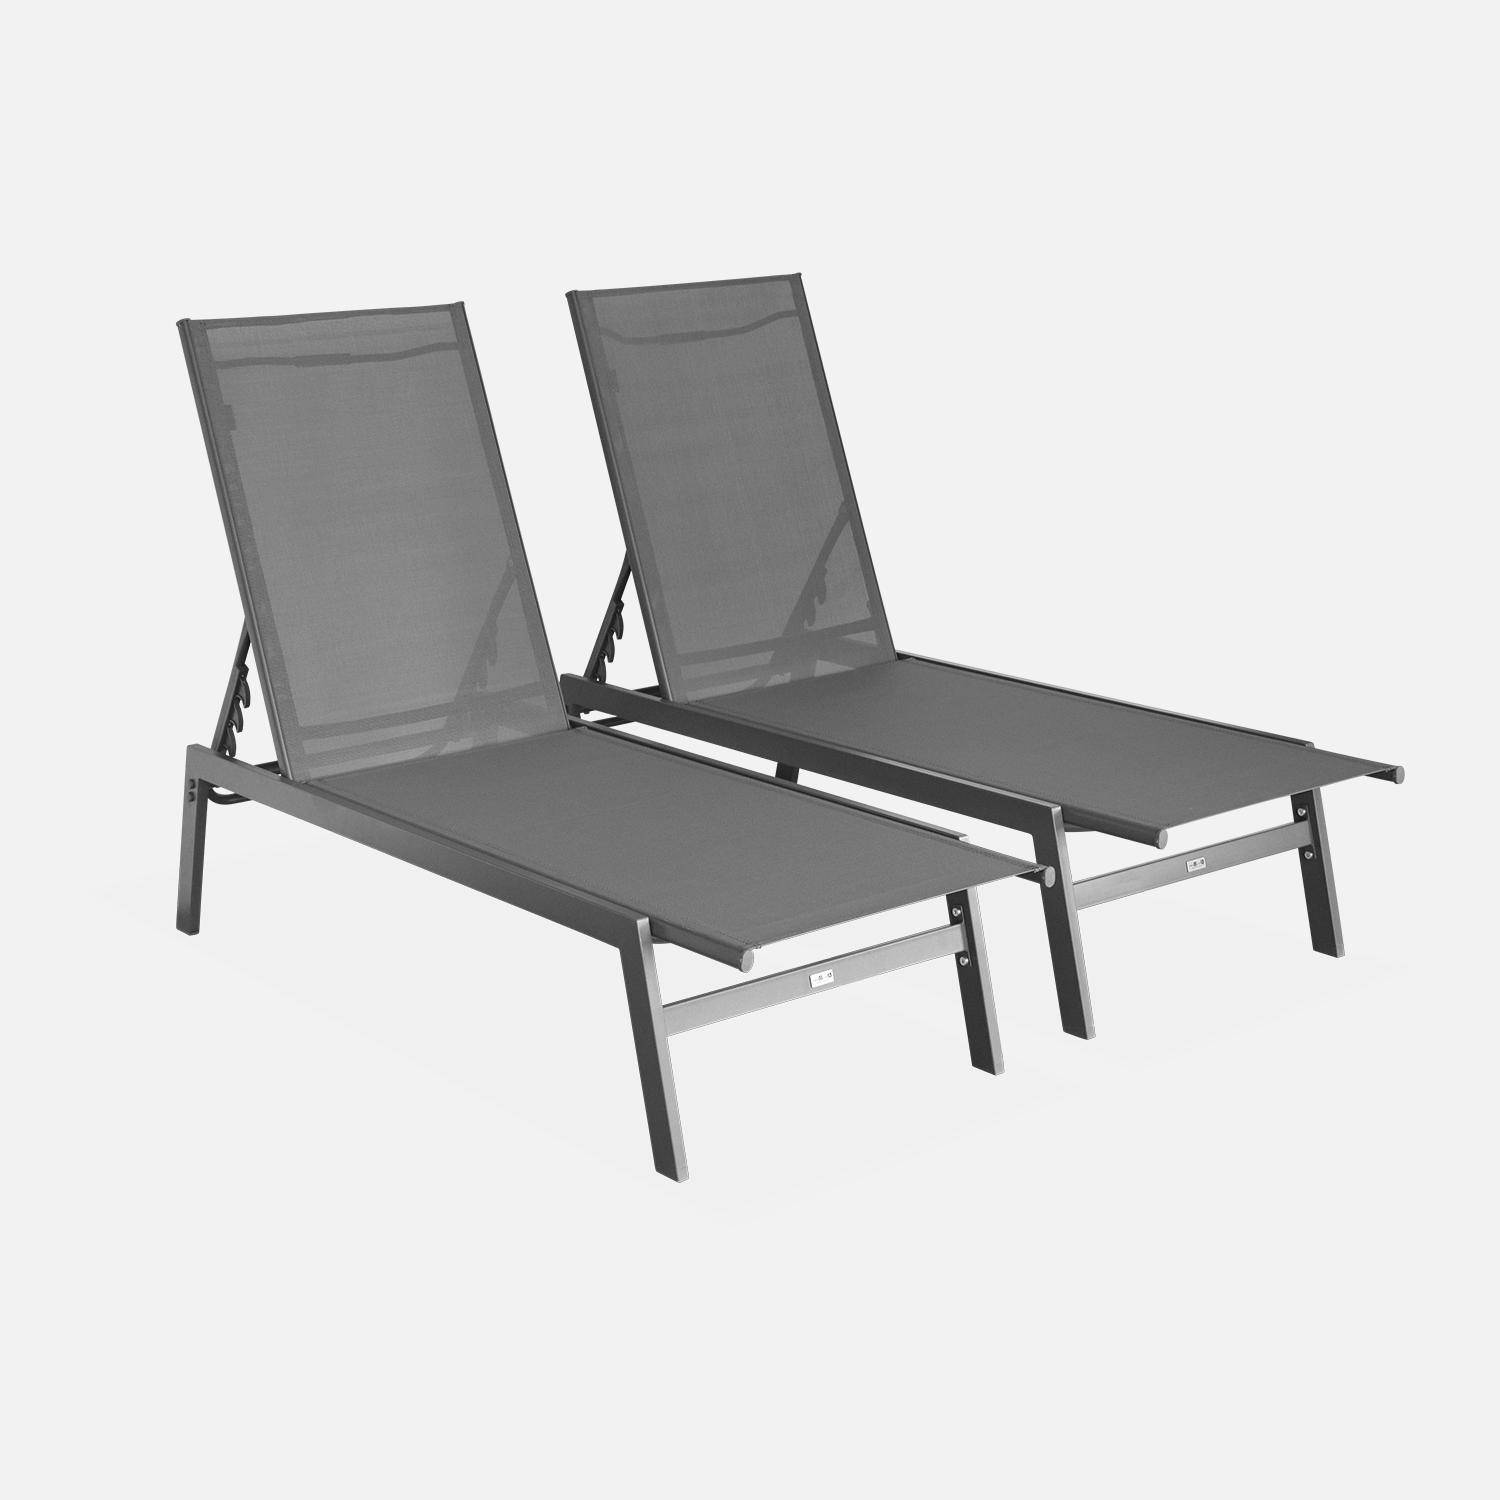 Pair of Textilene and Metal Multi-Position Sun Loungers, Anthracite,sweeek,Photo3